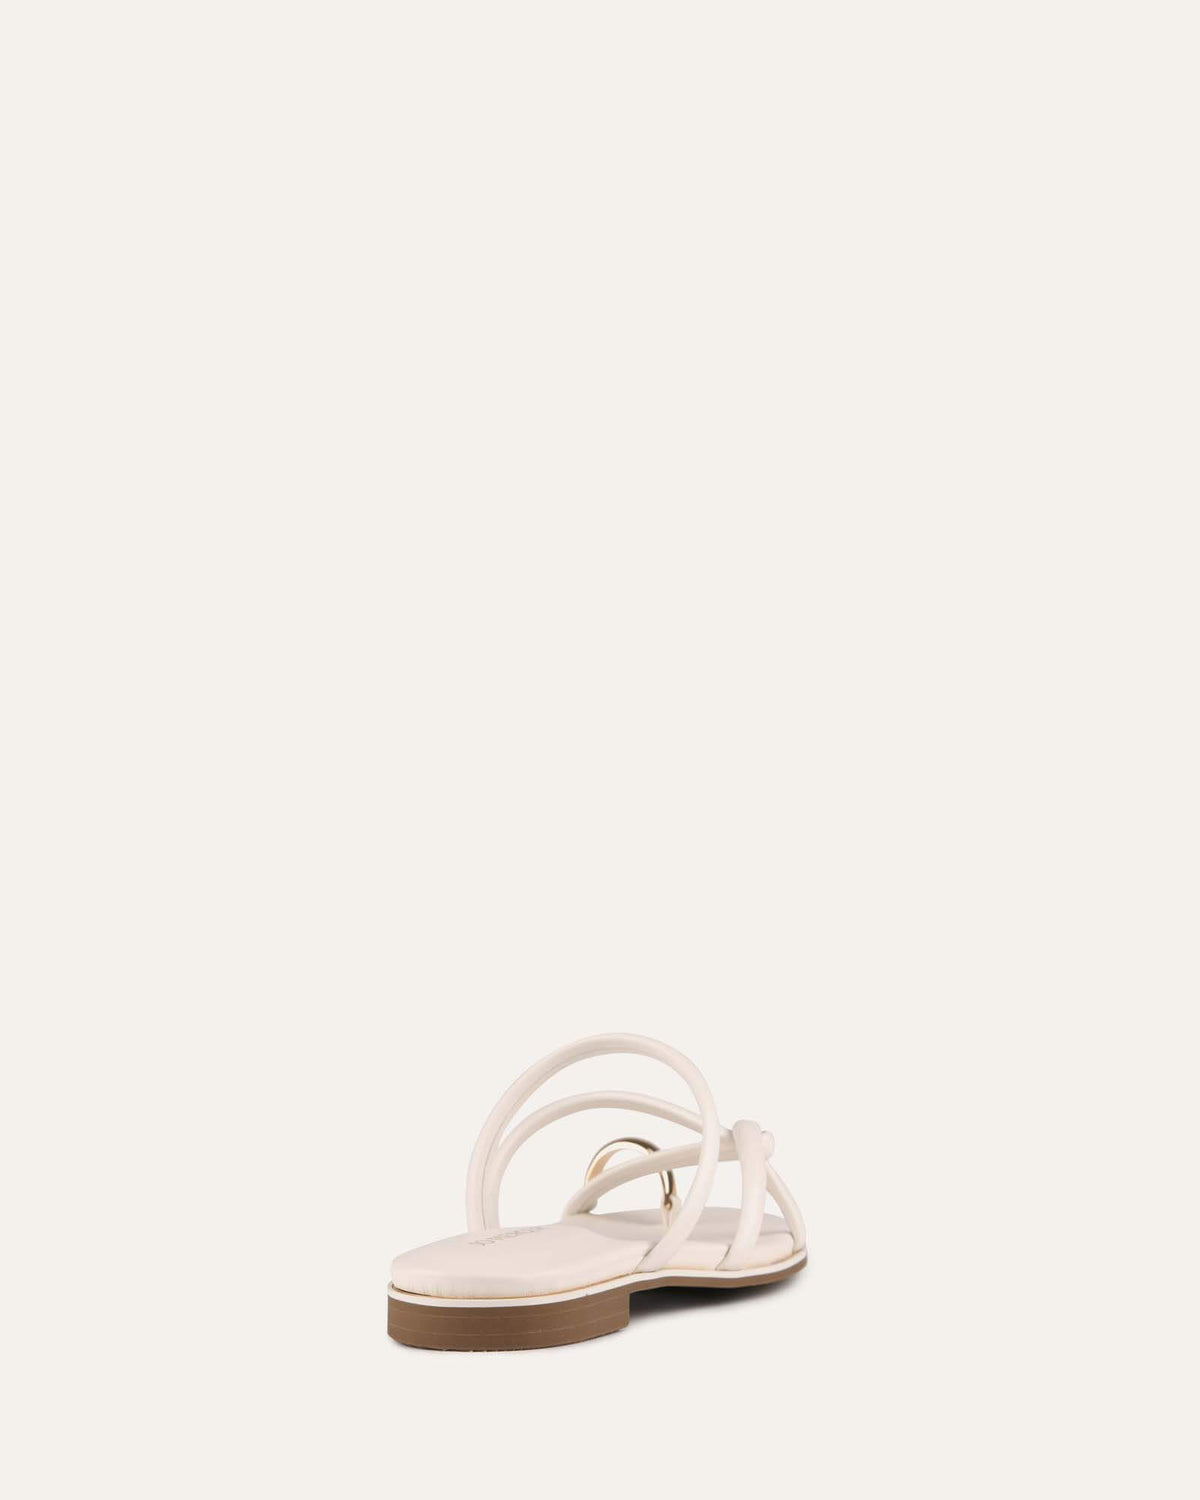 FORTUNE FLAT SLIDES WHITE LEATHER